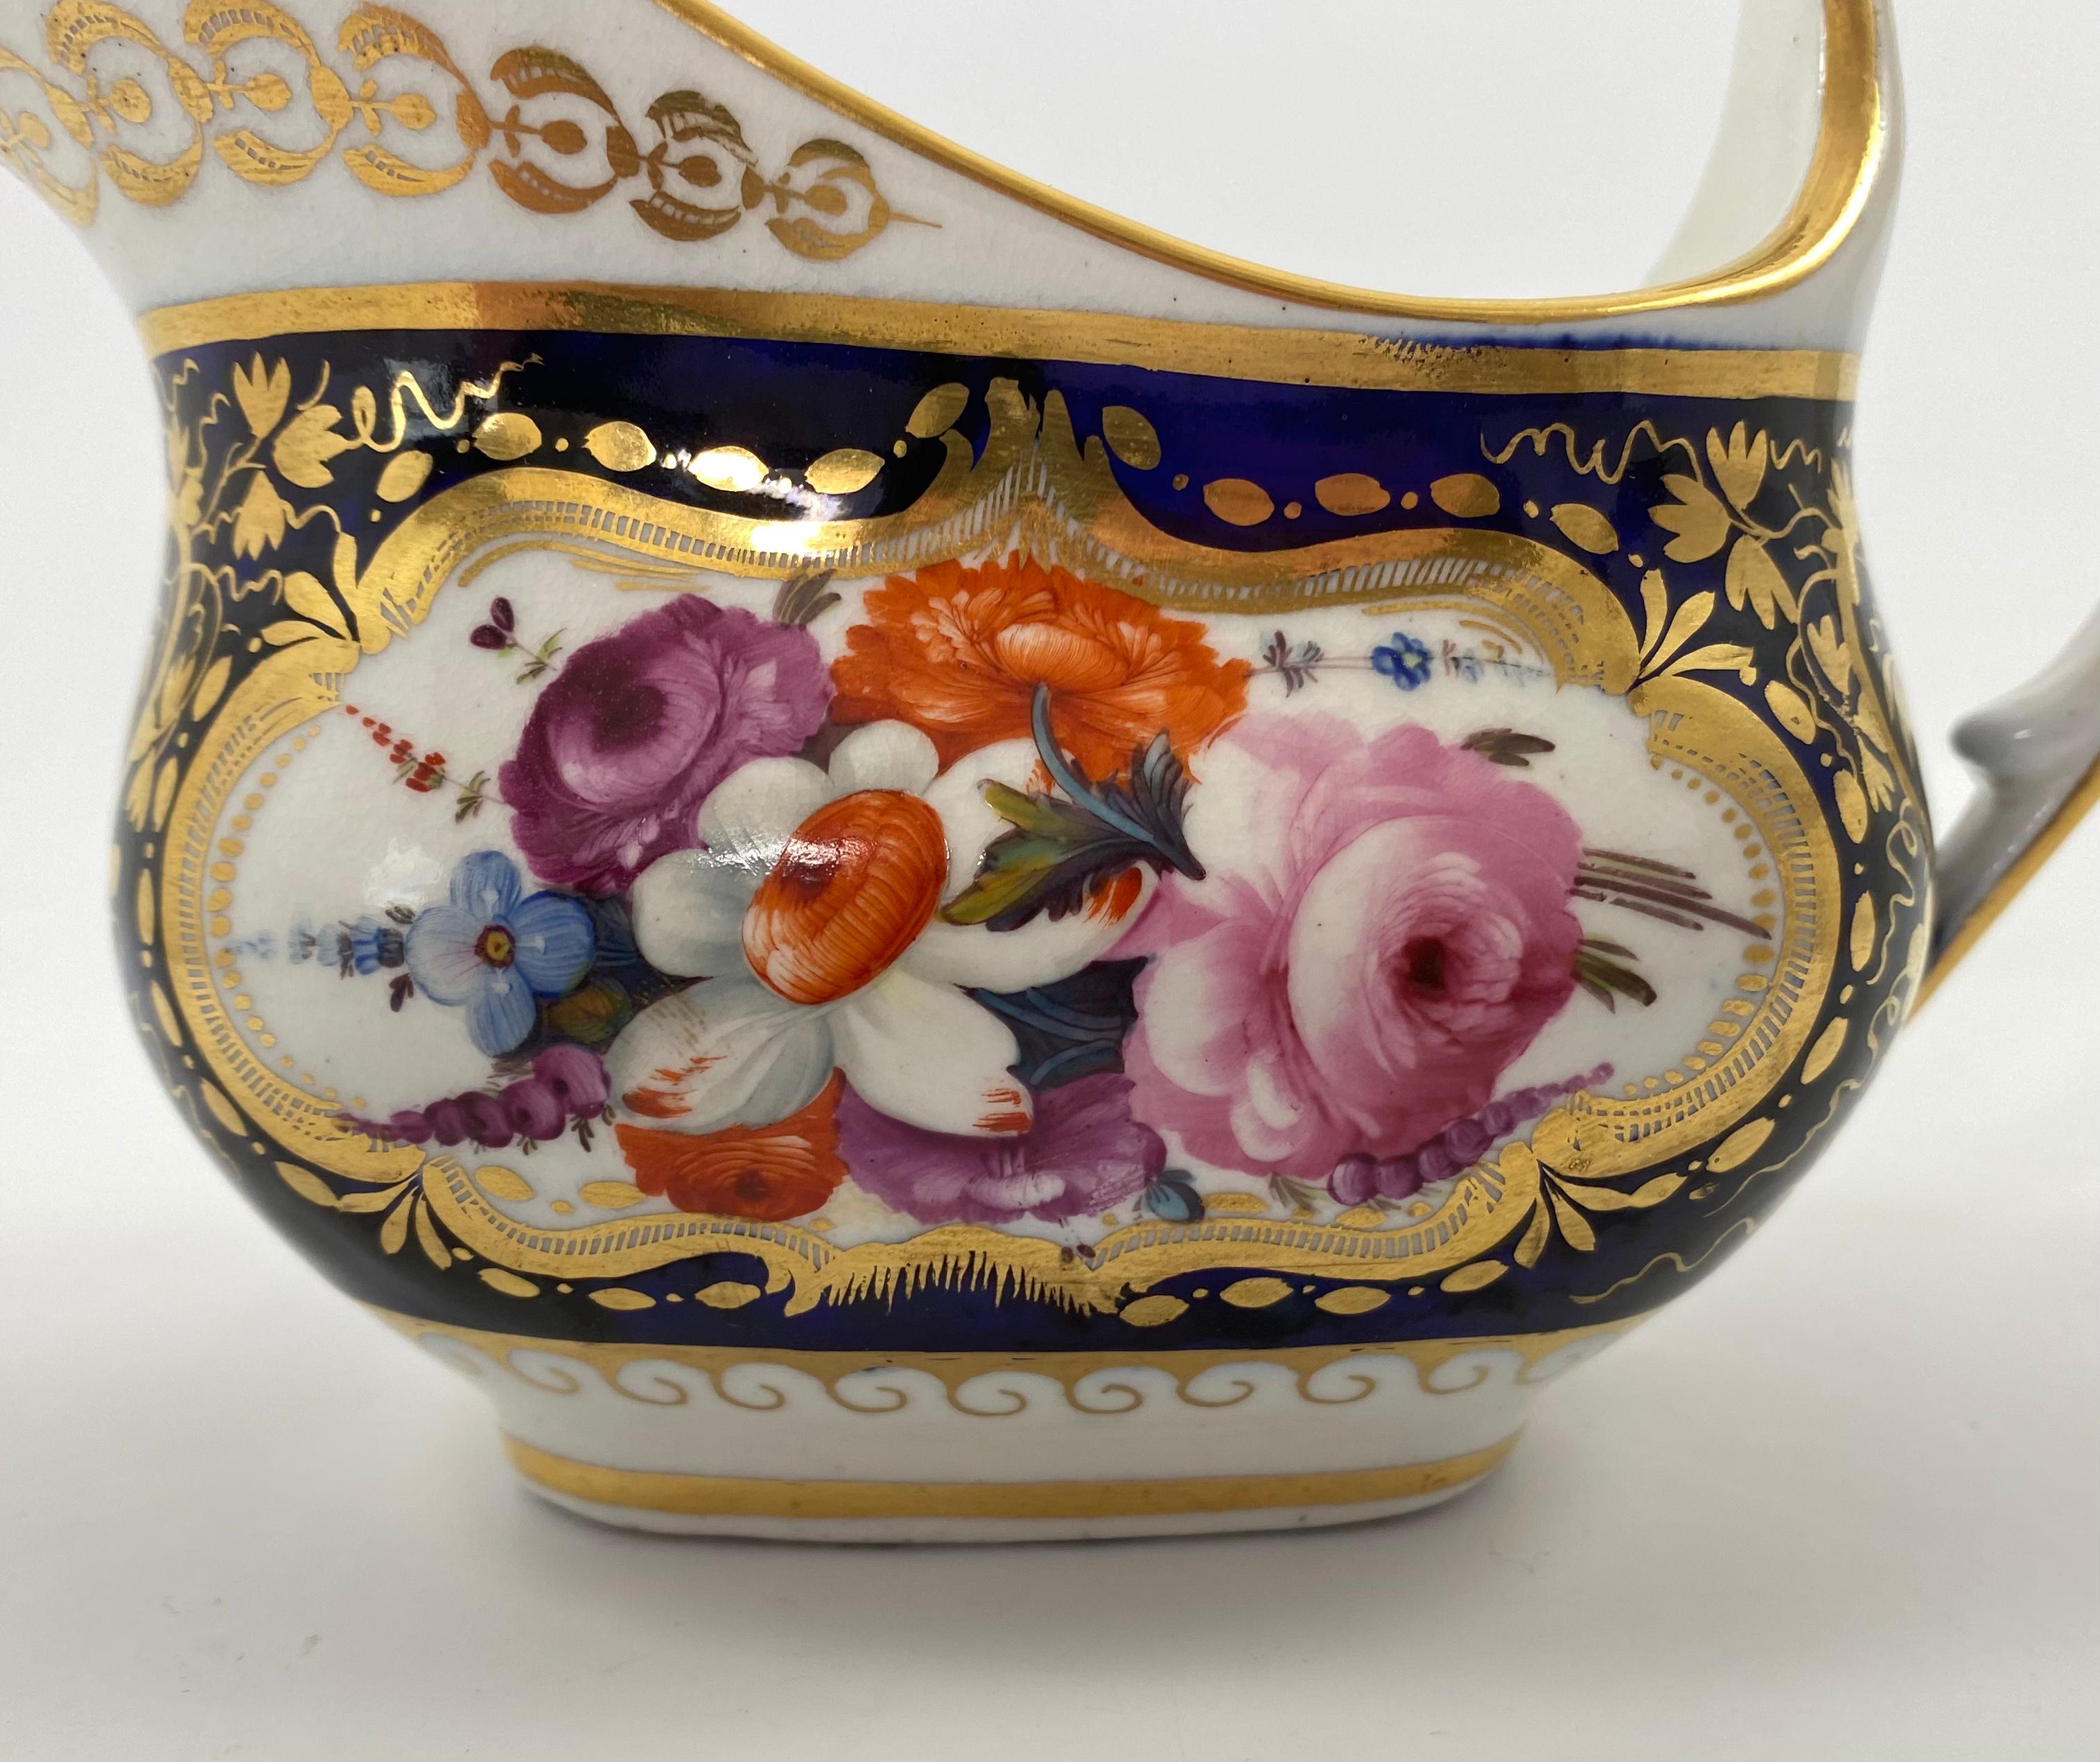 Coalport porcelain cream jug, c. 1830. Hand painted with sprays of flowers, within gilt scroll panels. The cobalt blue ground, decorated with gilt graping vines. Having an angular handles, and decorated in gilt with stylised acanthus